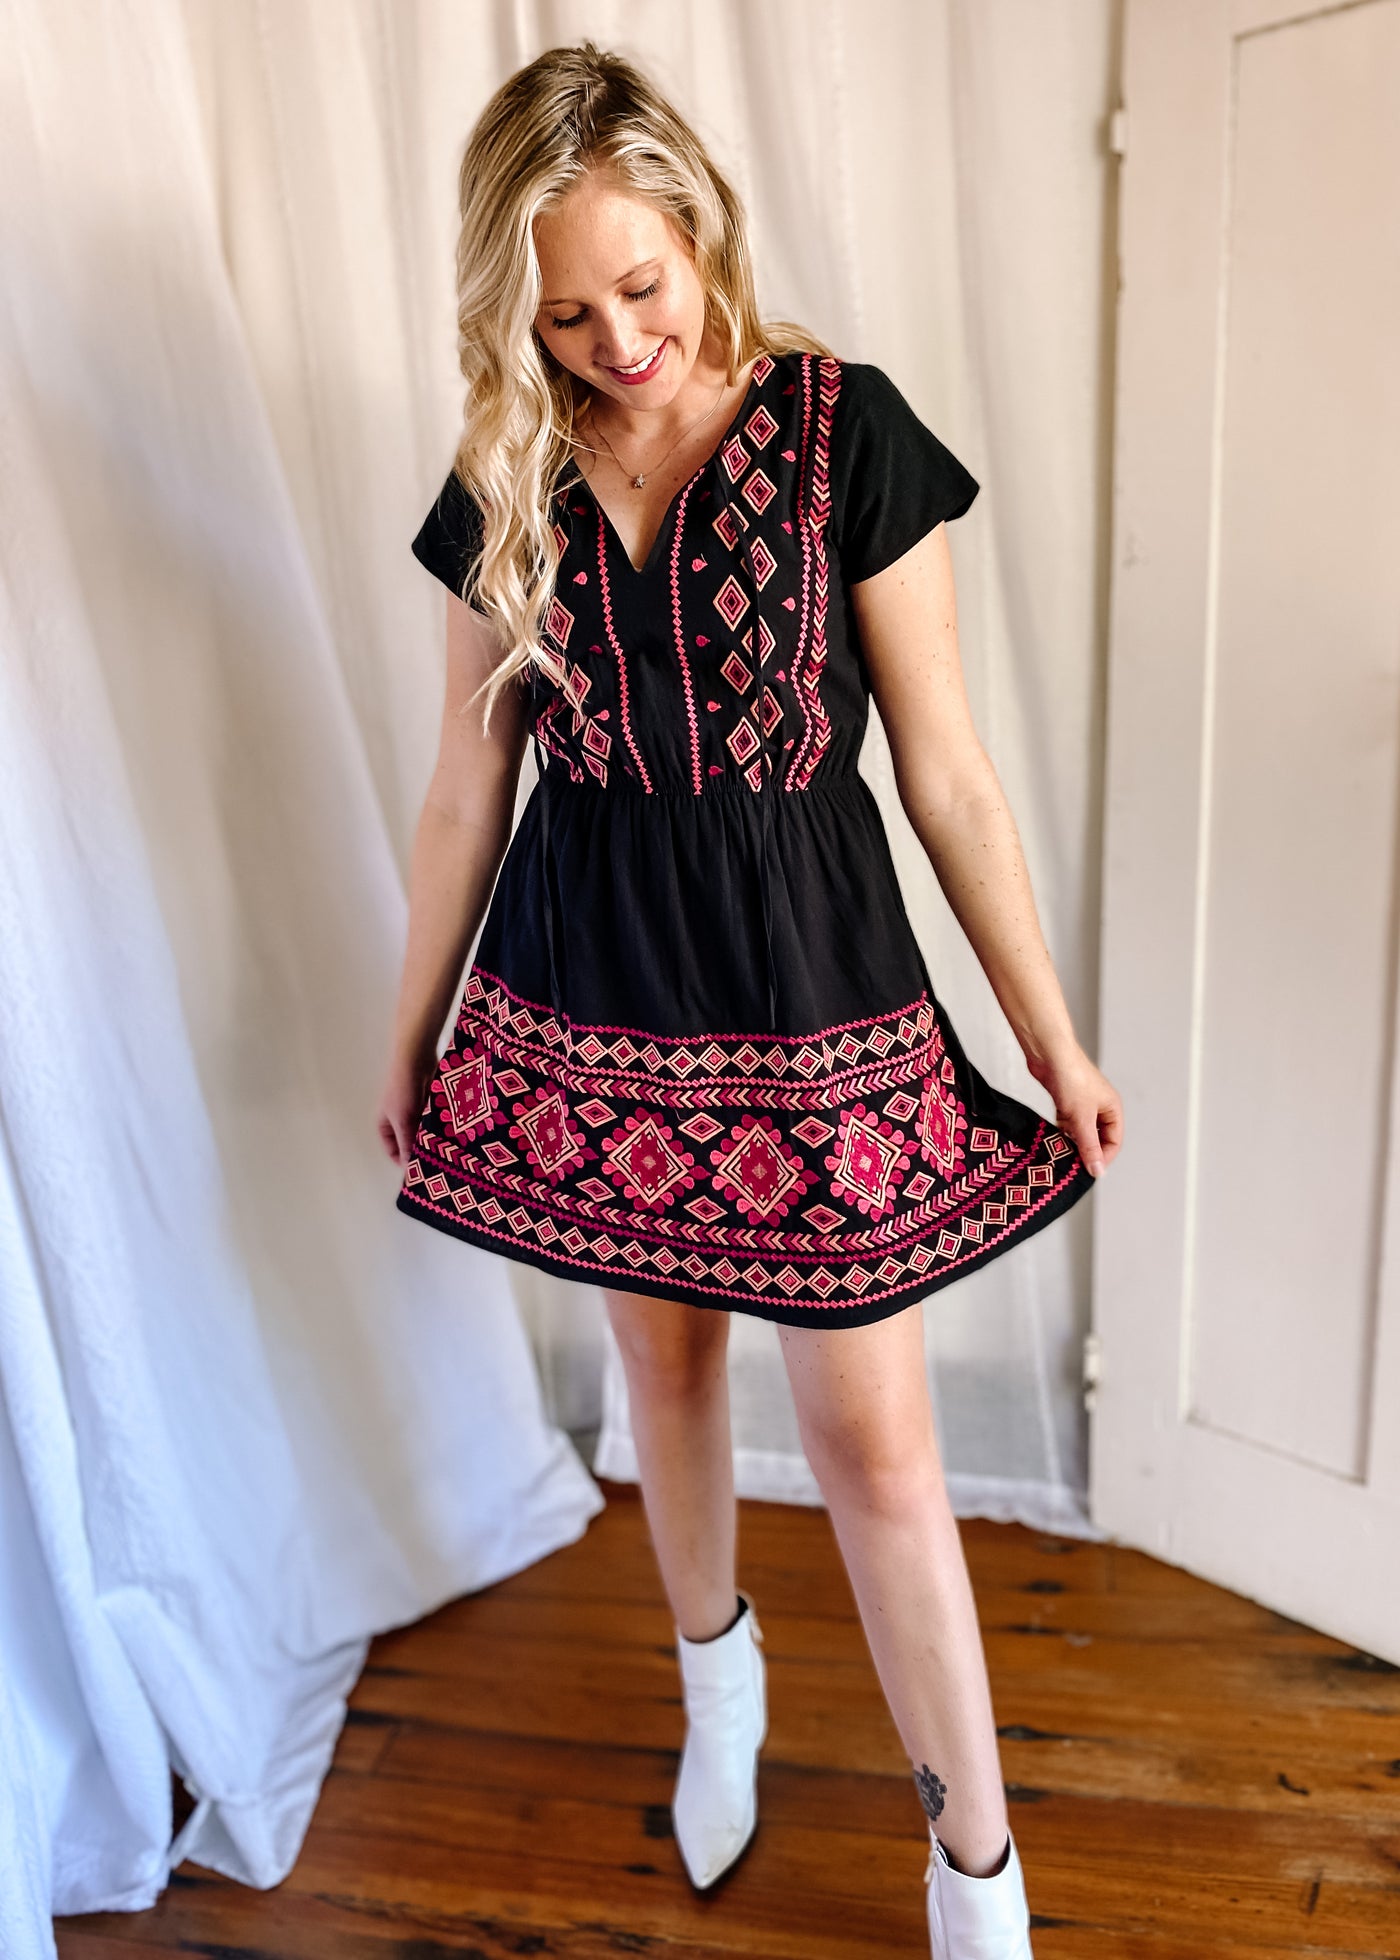 Radley Embroidered Dress (Small - 3X)